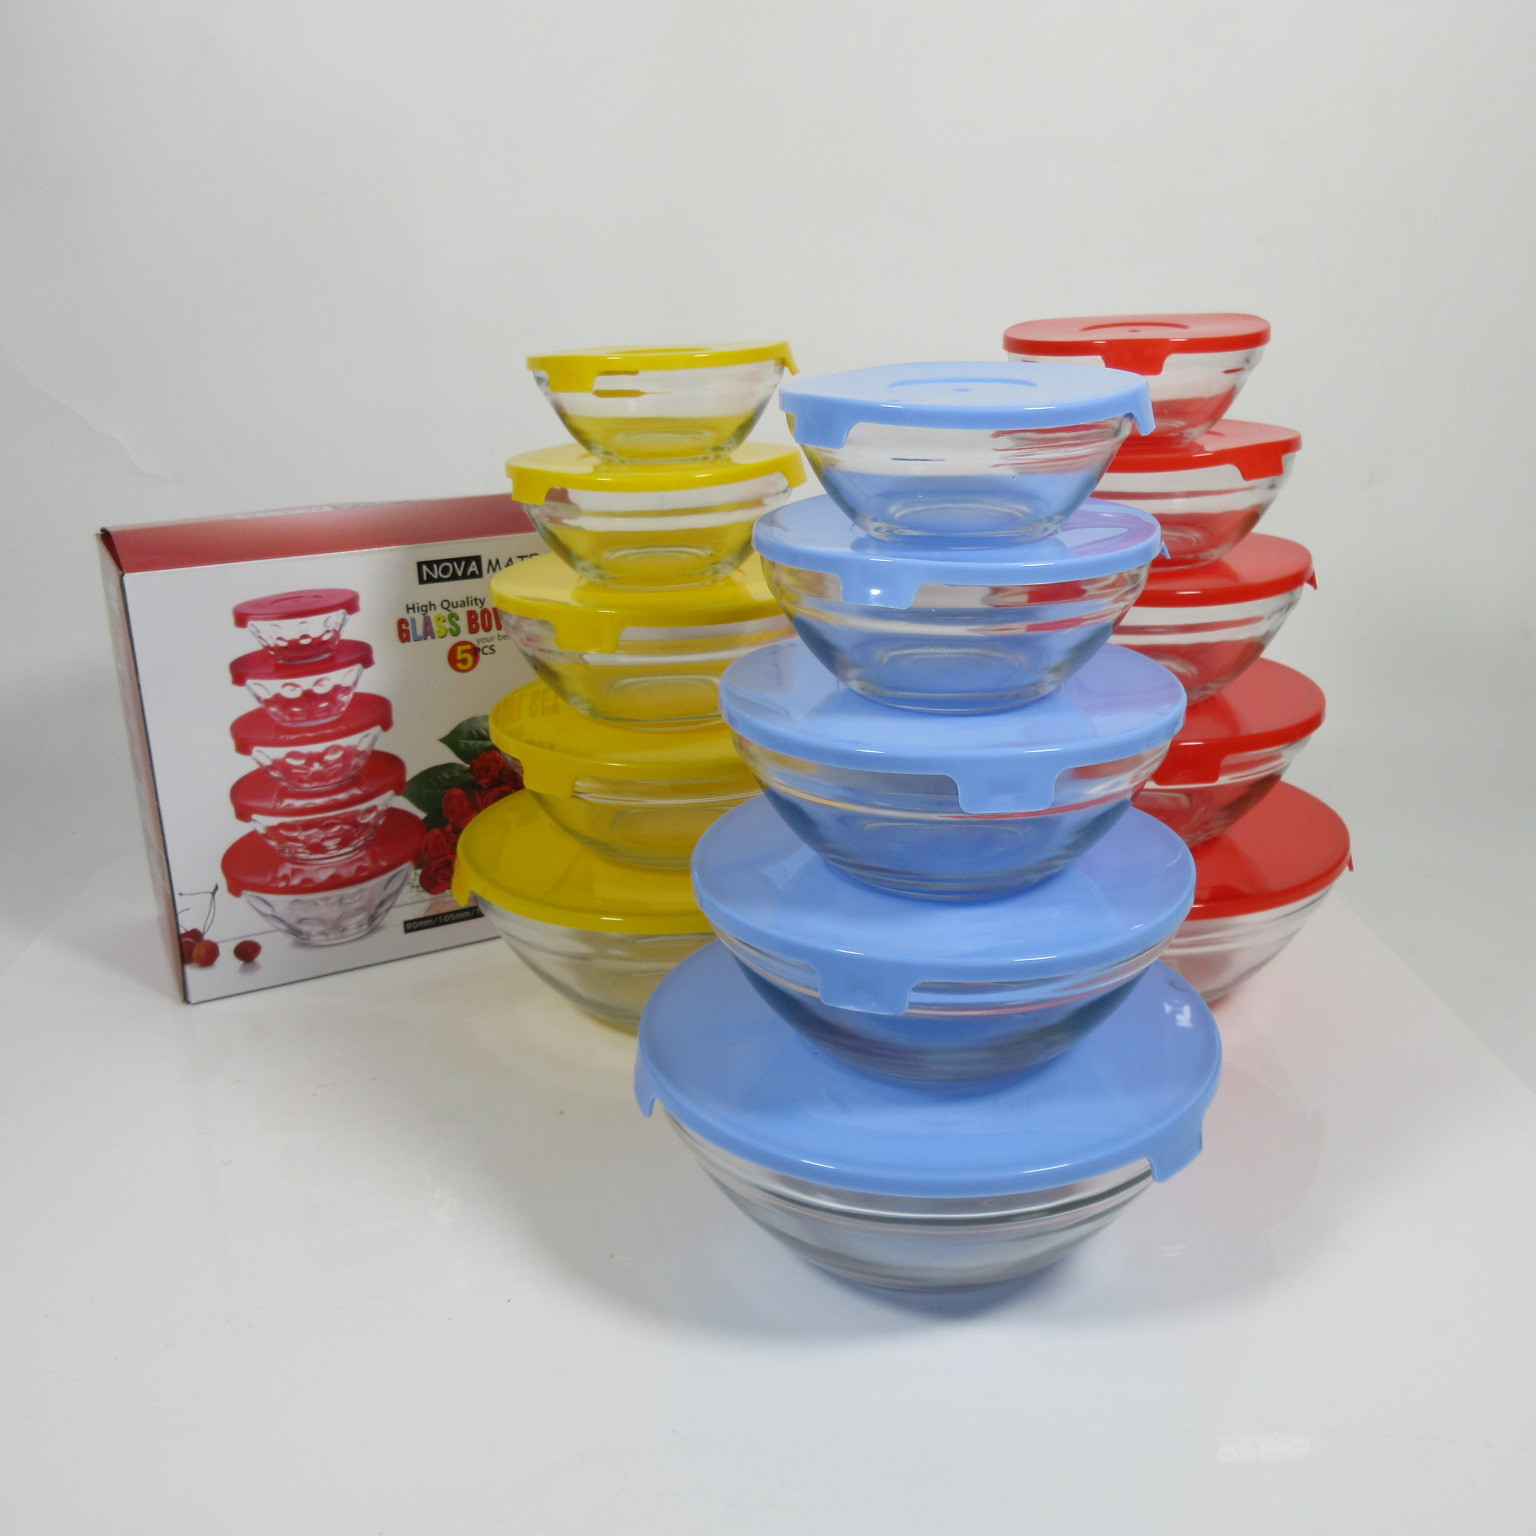 Sealed Freshness Bowl Five-Piece Wufu Bowl Microwave Oven Set Food Sealed Box Bento Lunch Box